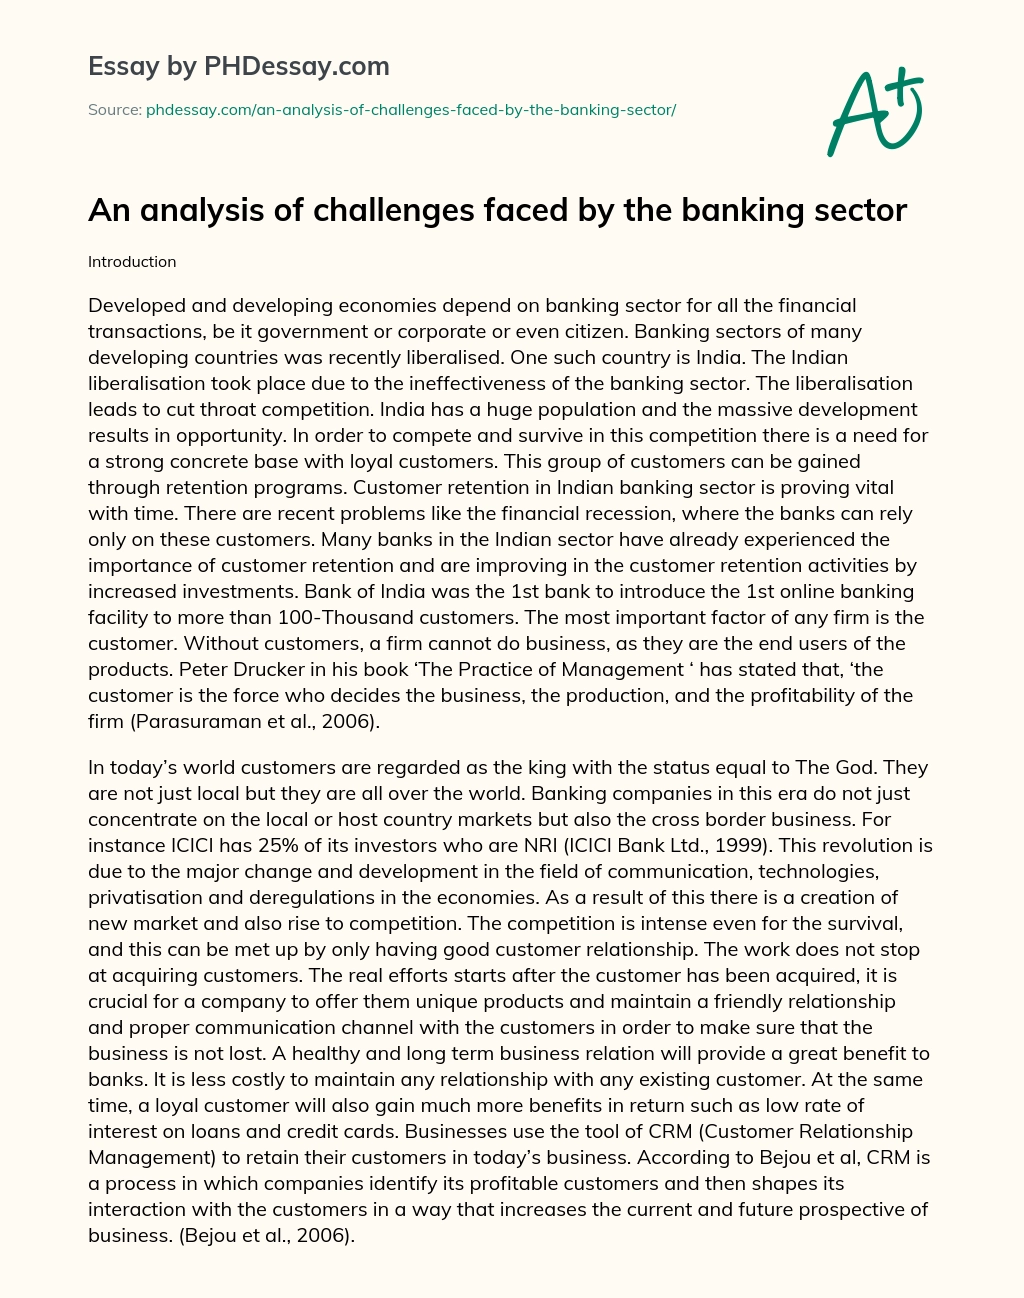 An analysis of challenges faced by the banking sector essay